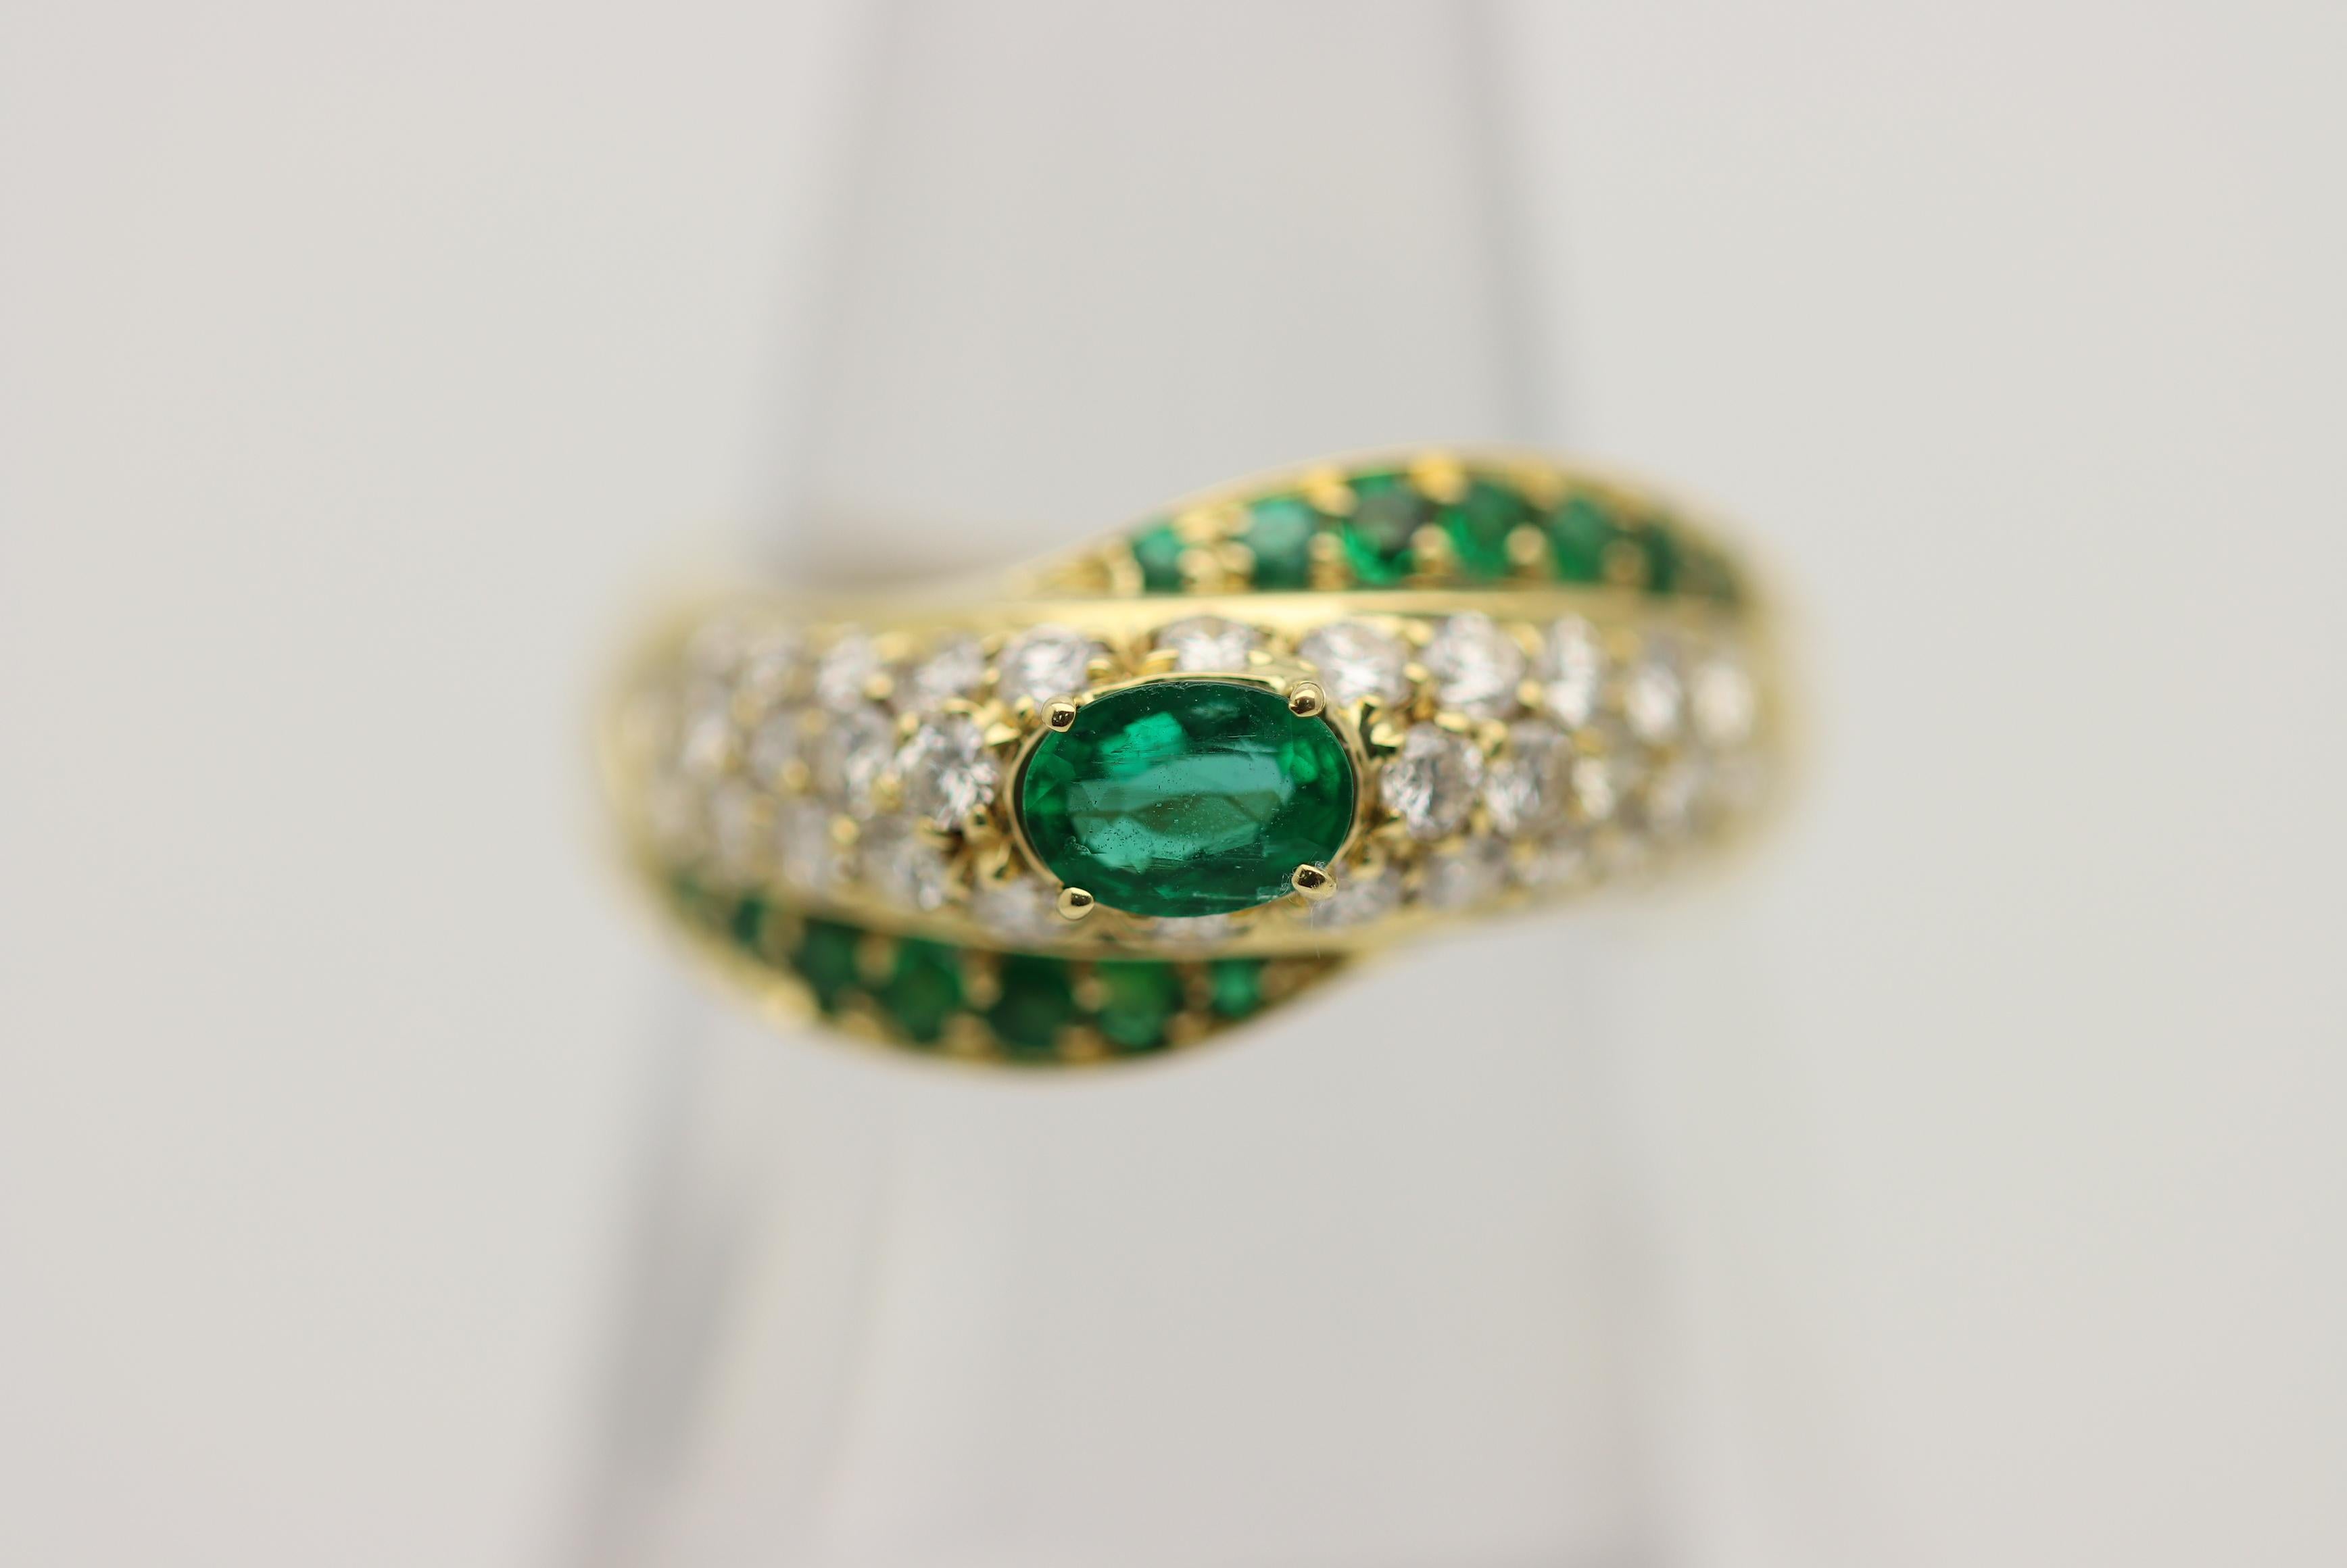 A sleek and stylish ring made in 18k yellow gold. It features 0.85 carats of bright green emeralds including the large oval-shape emerald in the center of the ring. It is complemented by 0.96 carats of round brilliant-cut diamonds set in the center